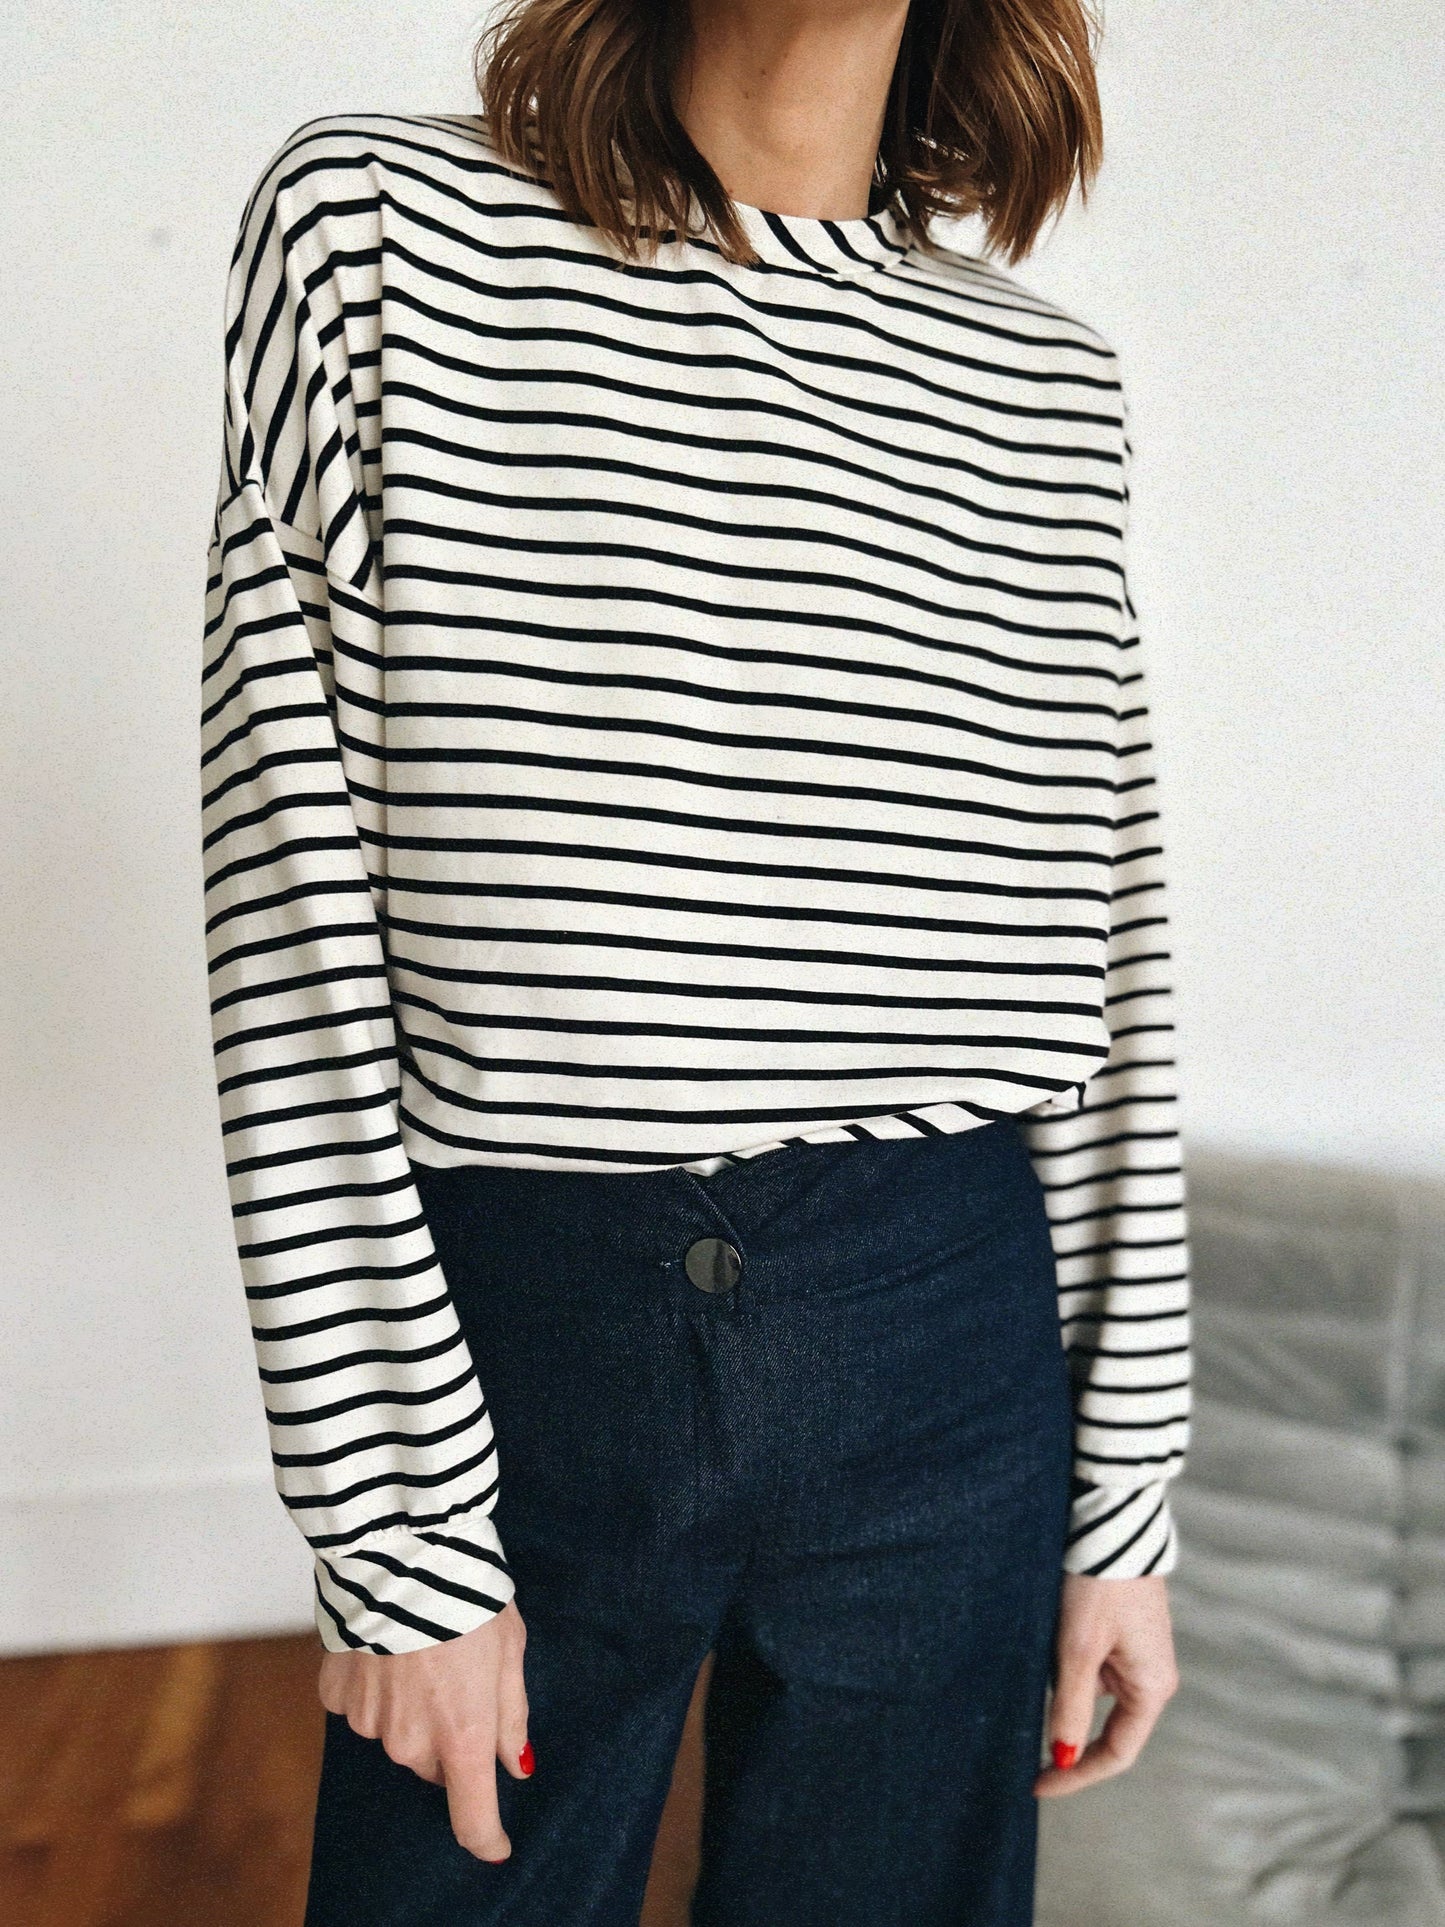 The Ginette striped sweater